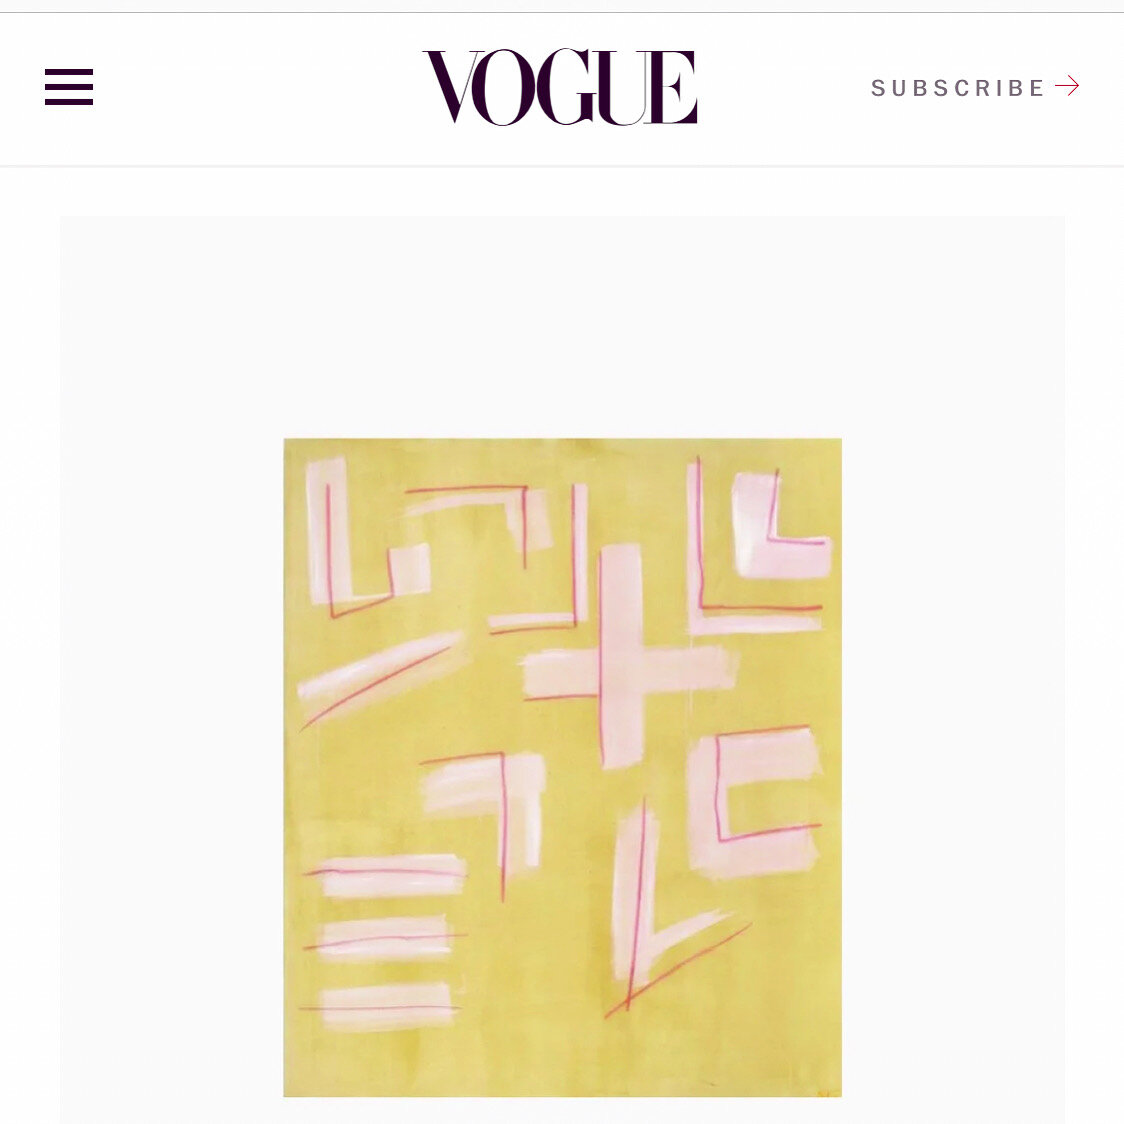 https://www.vogue.com/article/where-to-buy-art-online